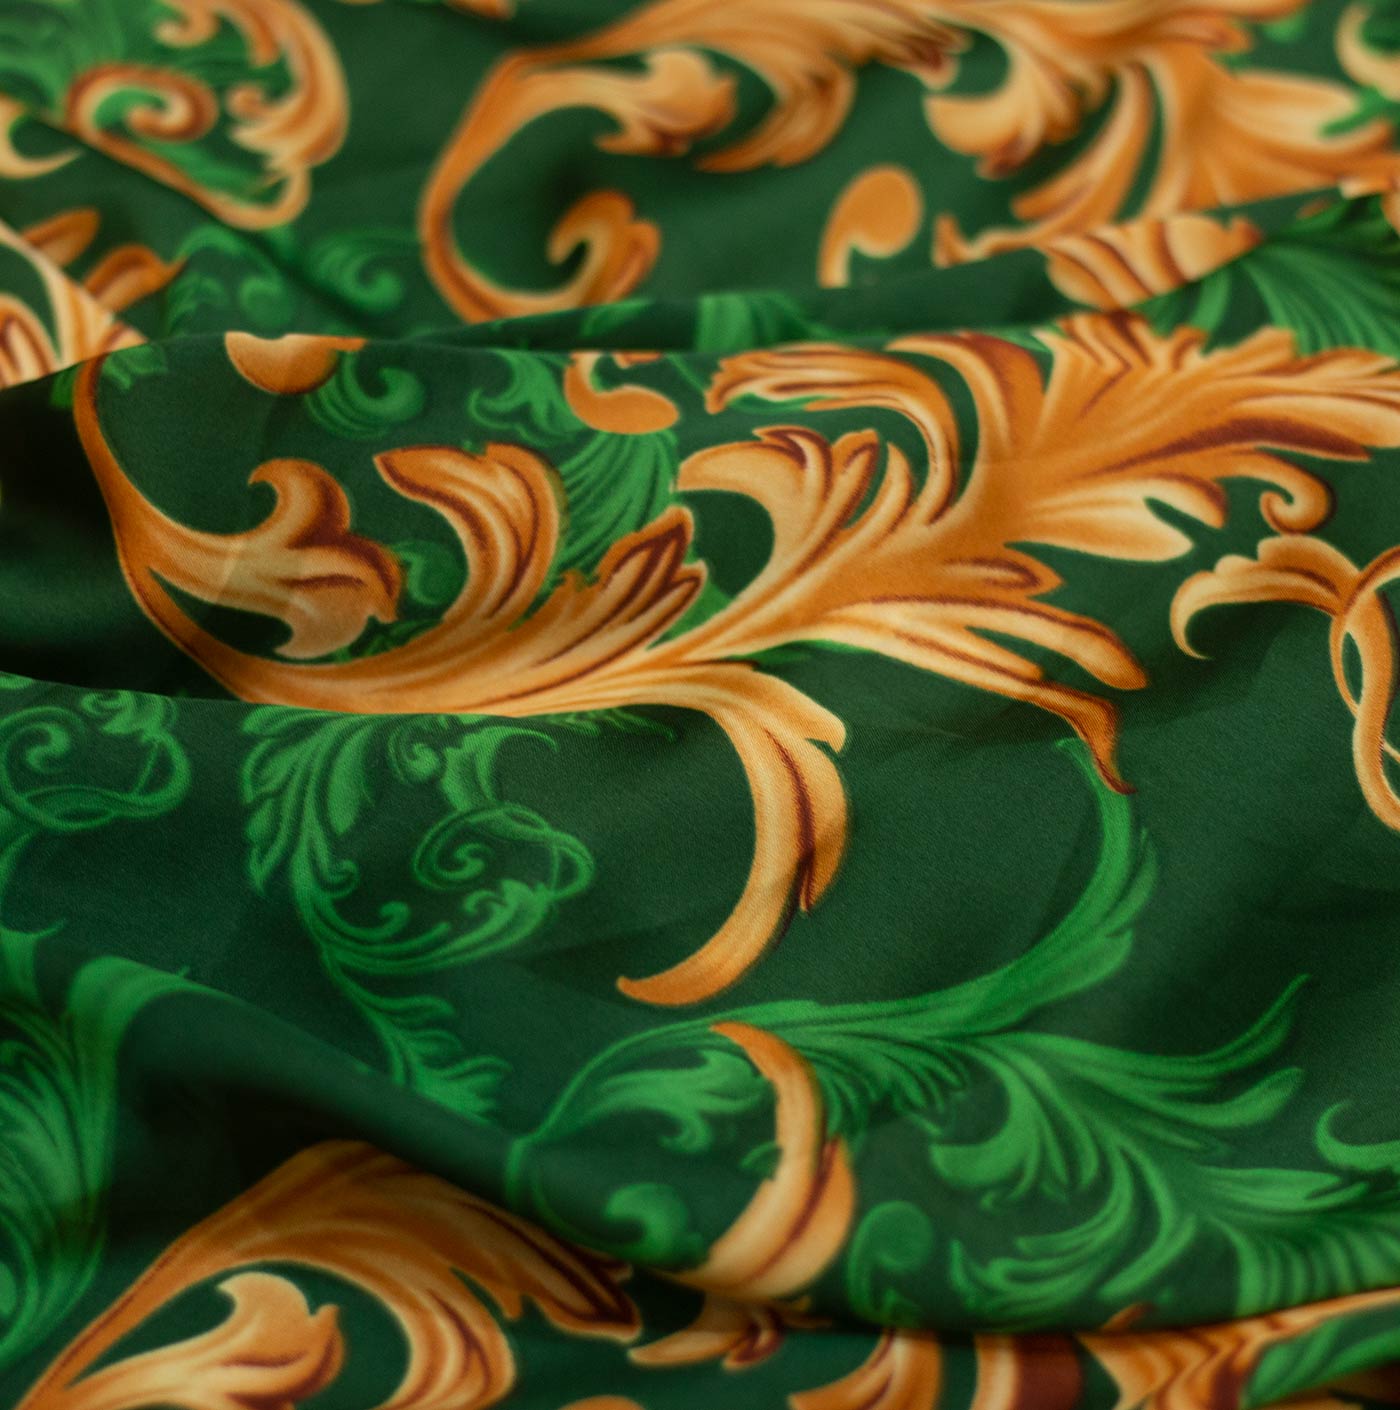 Green and Gold Fire Floral Printed Silk Fabric